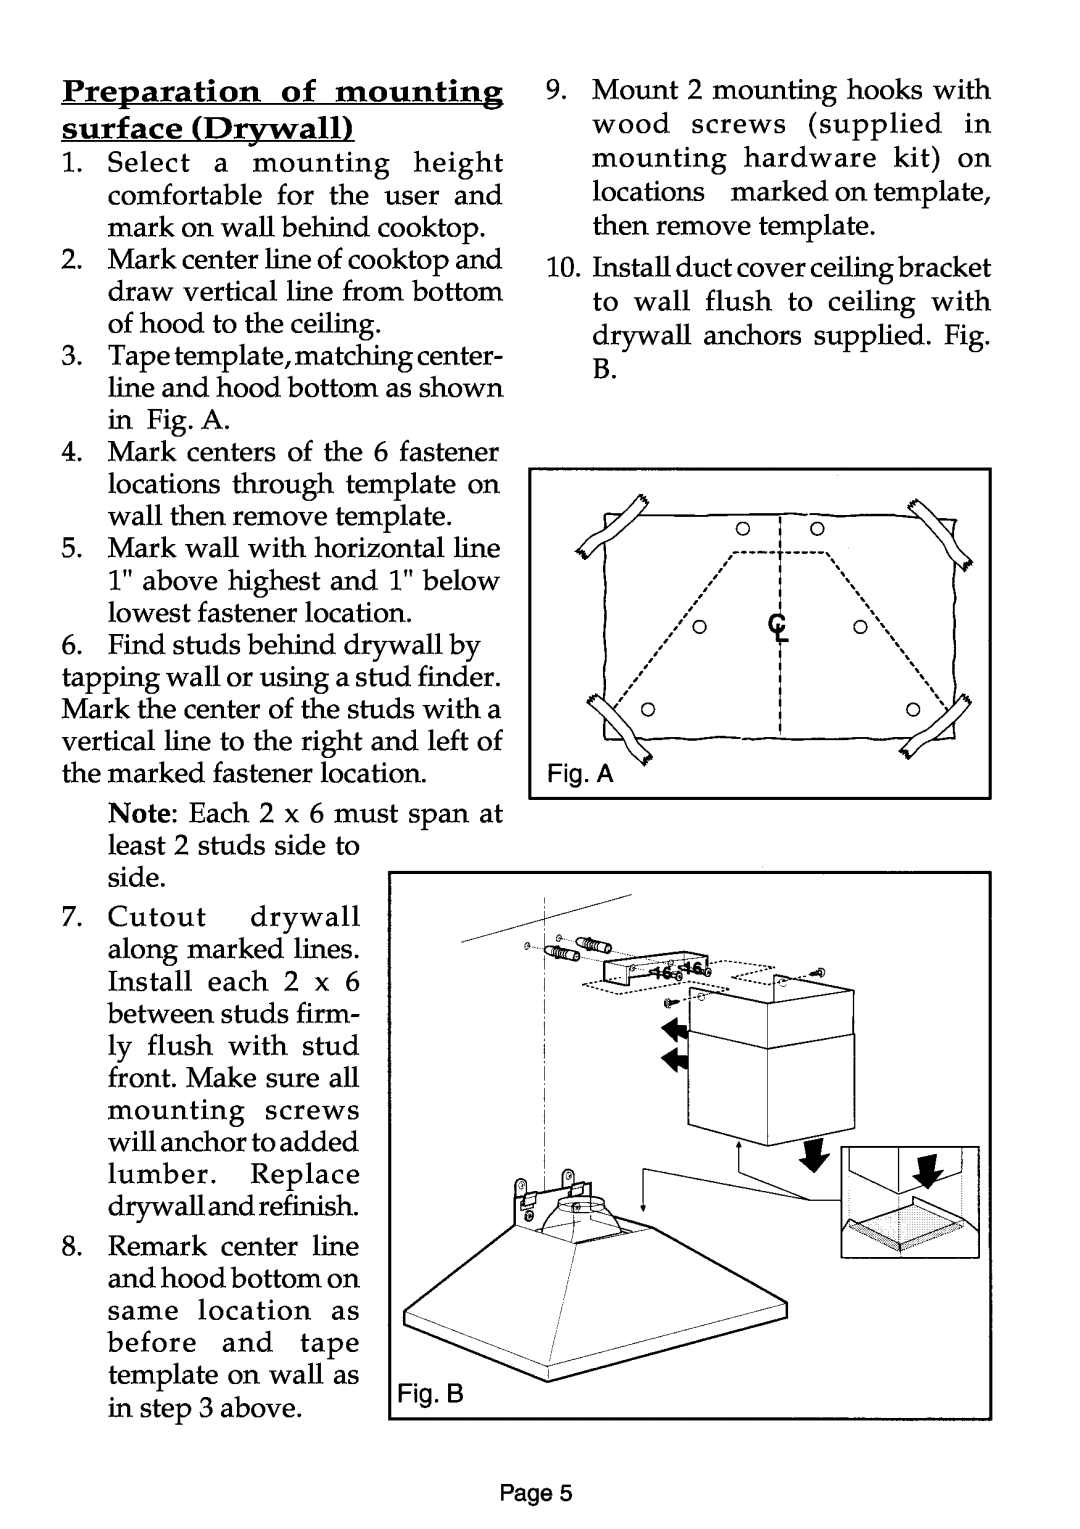 Thermador HCSW, HSW, HDW, HGSW installation instructions Preparation of mounting surface Drywall 